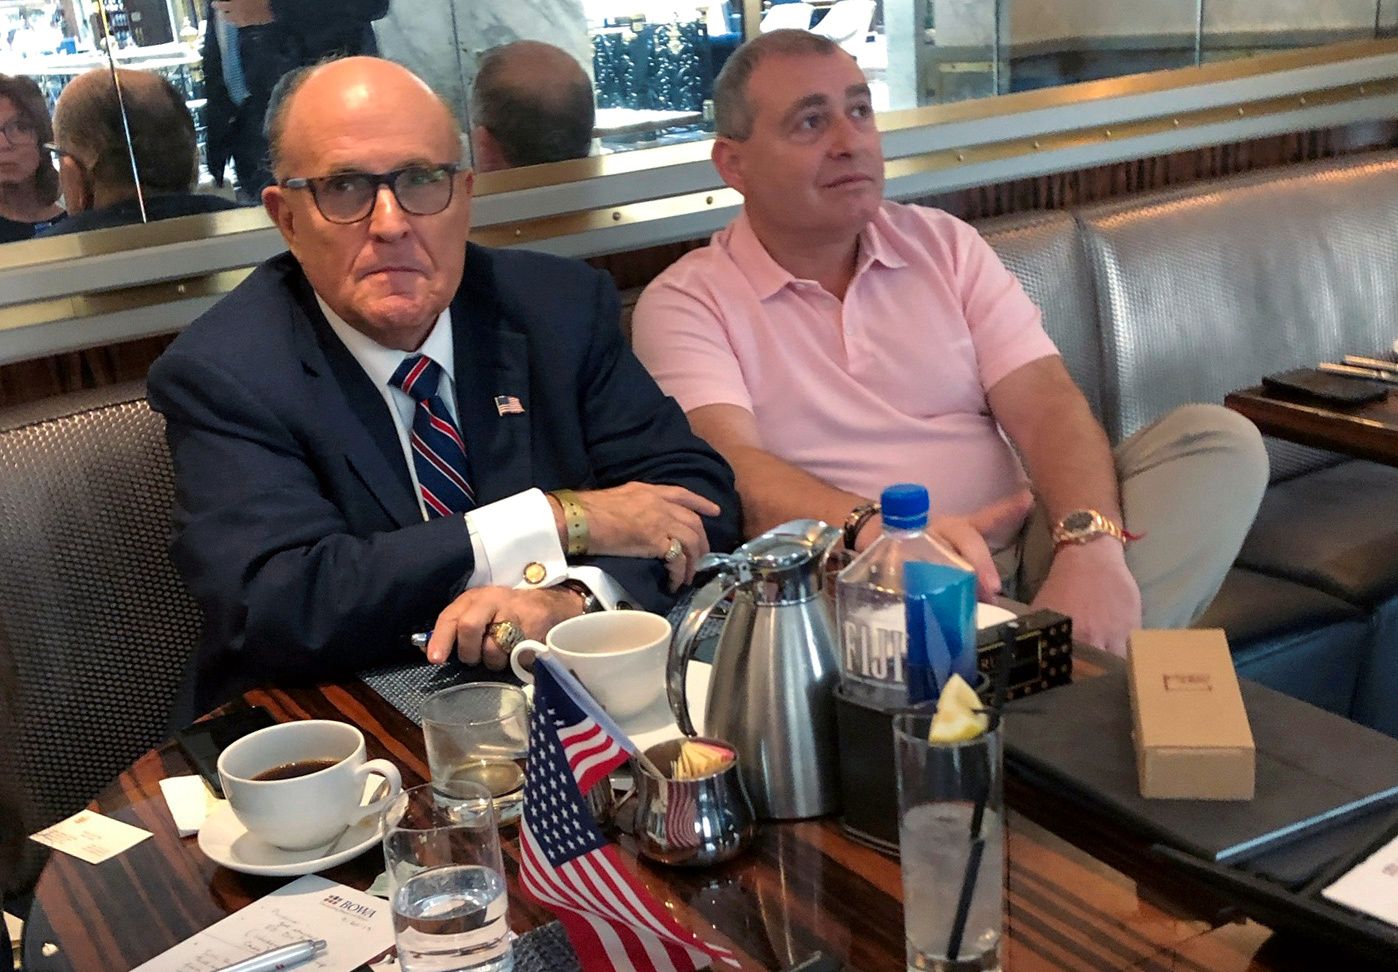 Giuliani employee known guilty of illegal campaign financing - VG